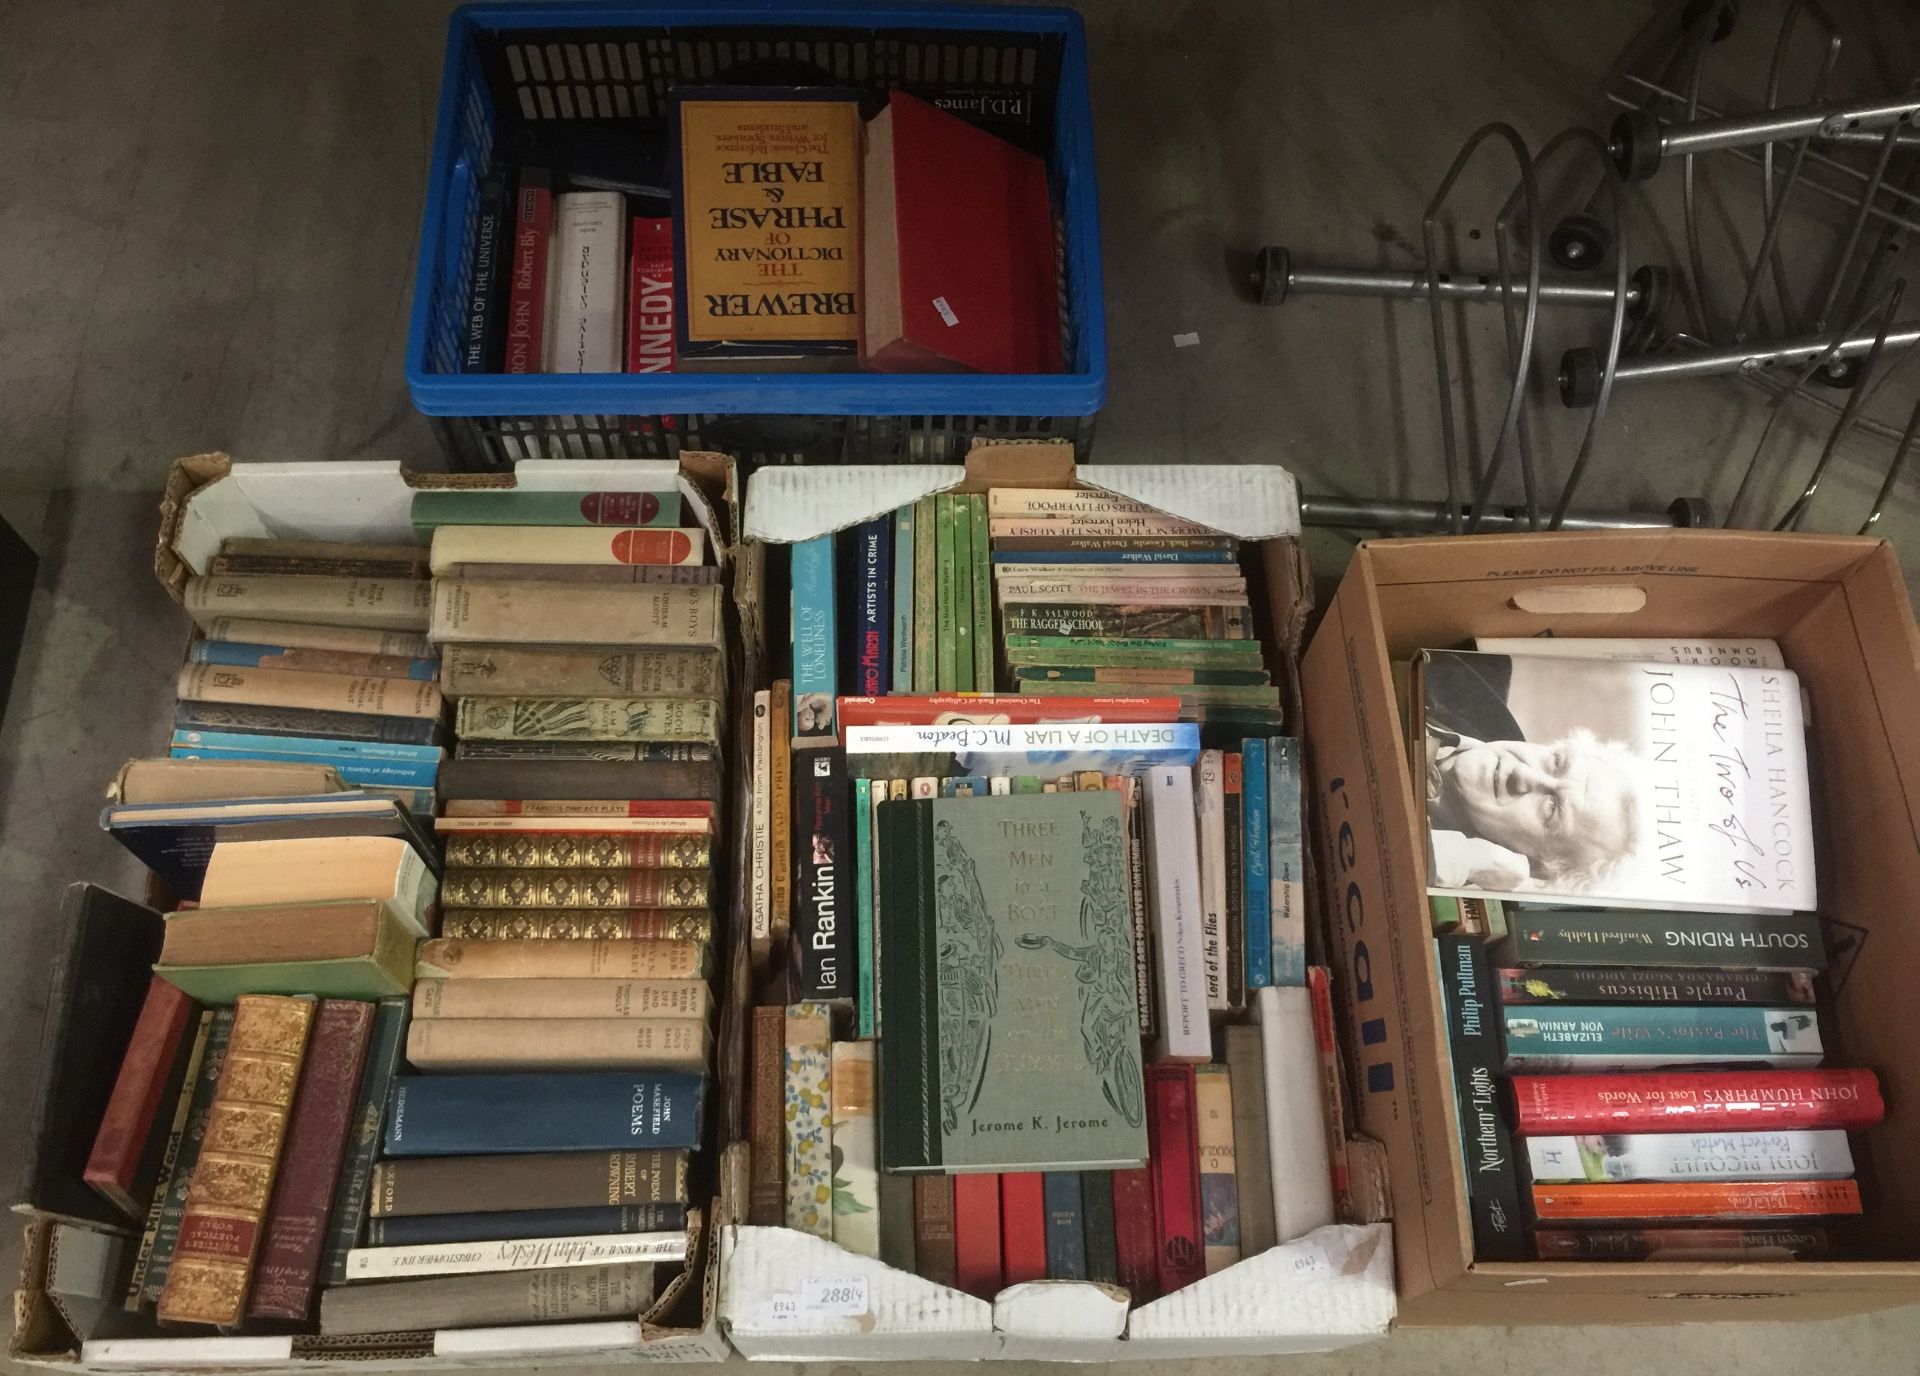 Contents to 4 boxes - novels, poetry books,